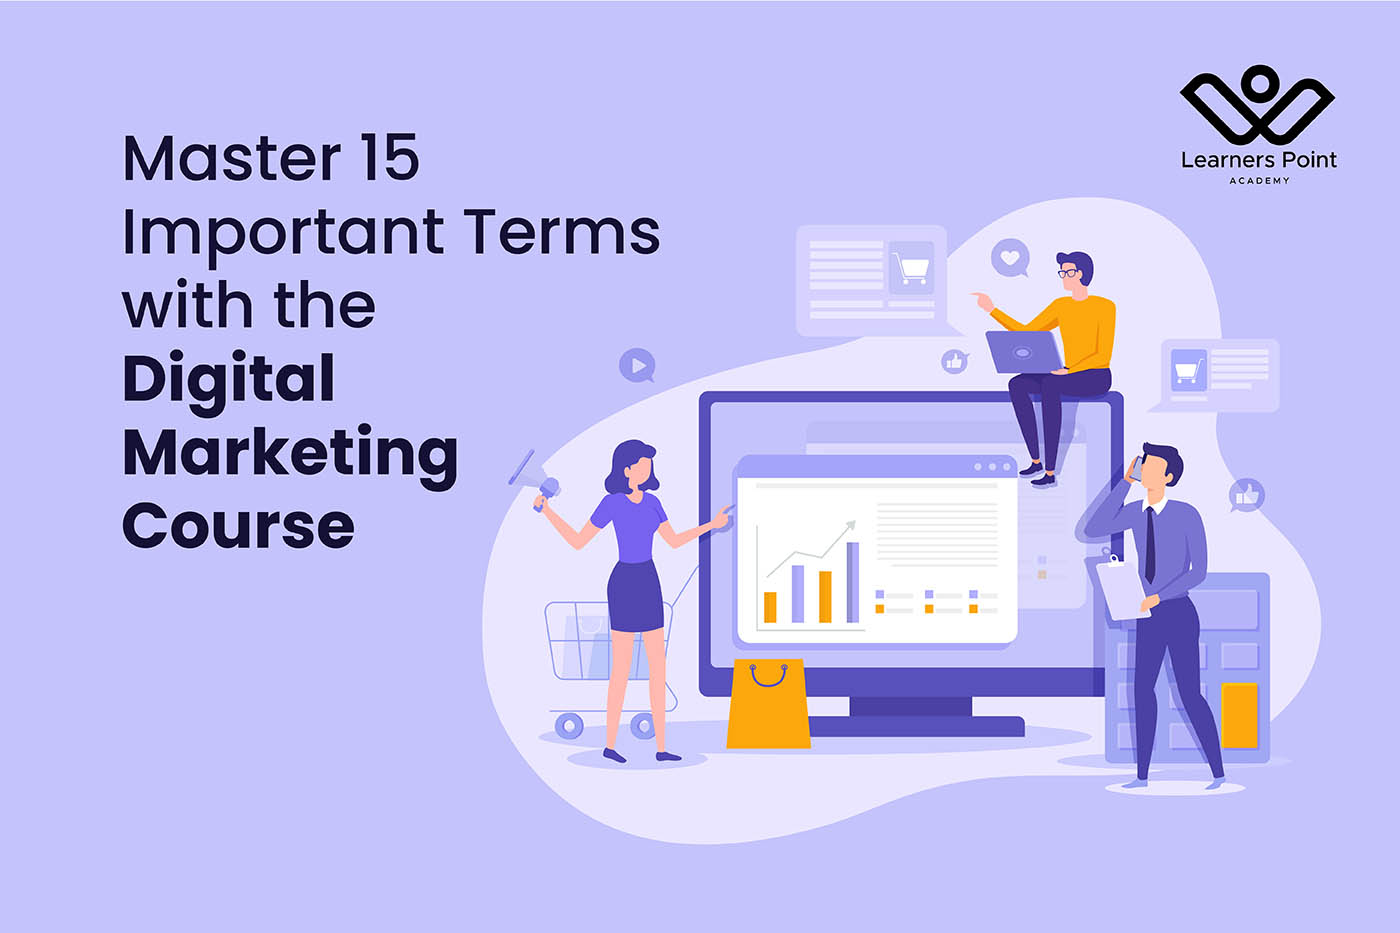 Master 15 Important Terms with the Digital Marketing Course